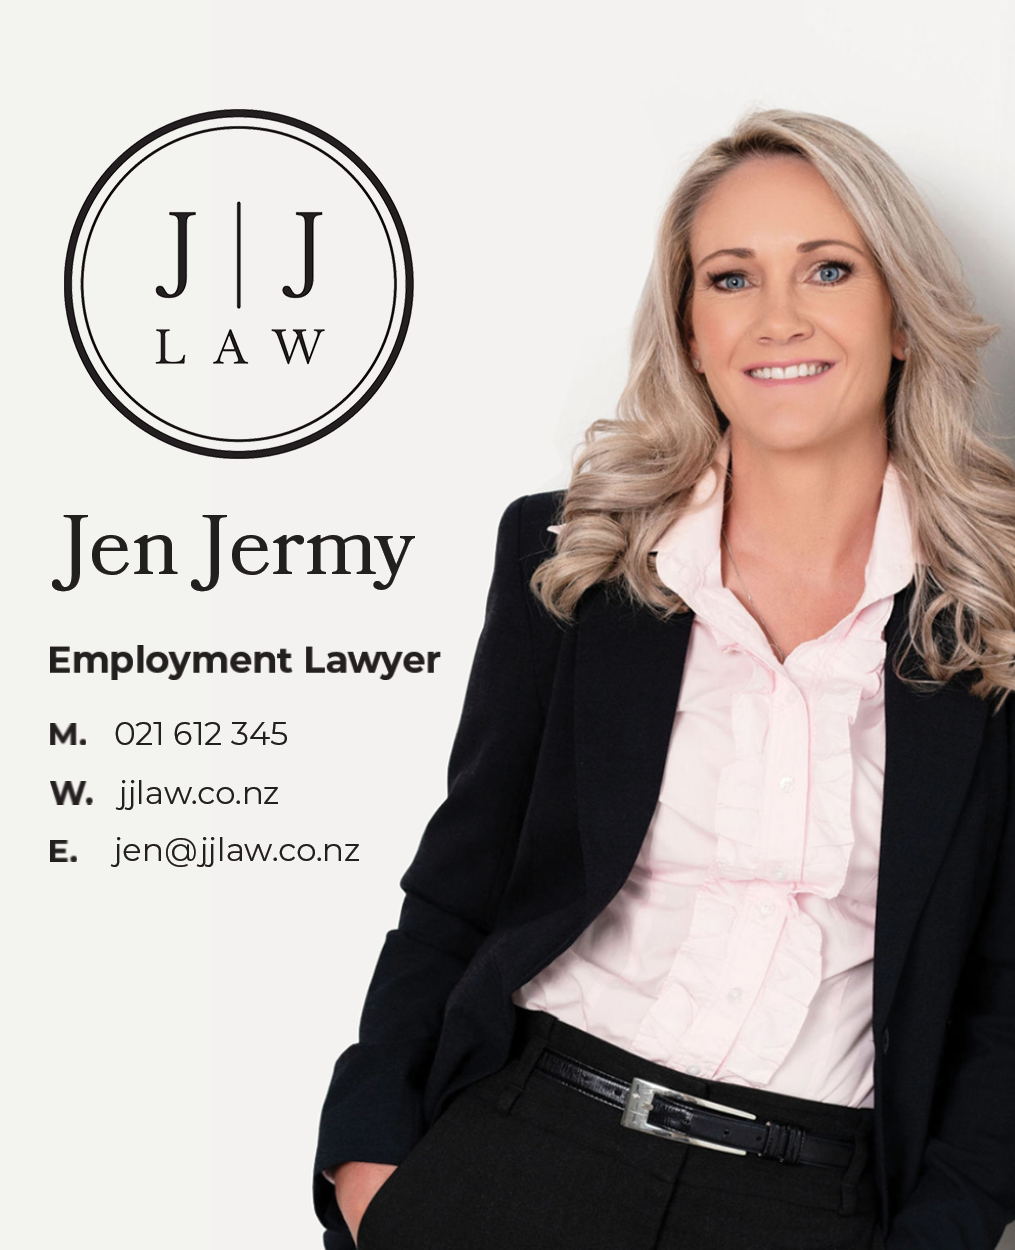 JJ Law ad (1).png